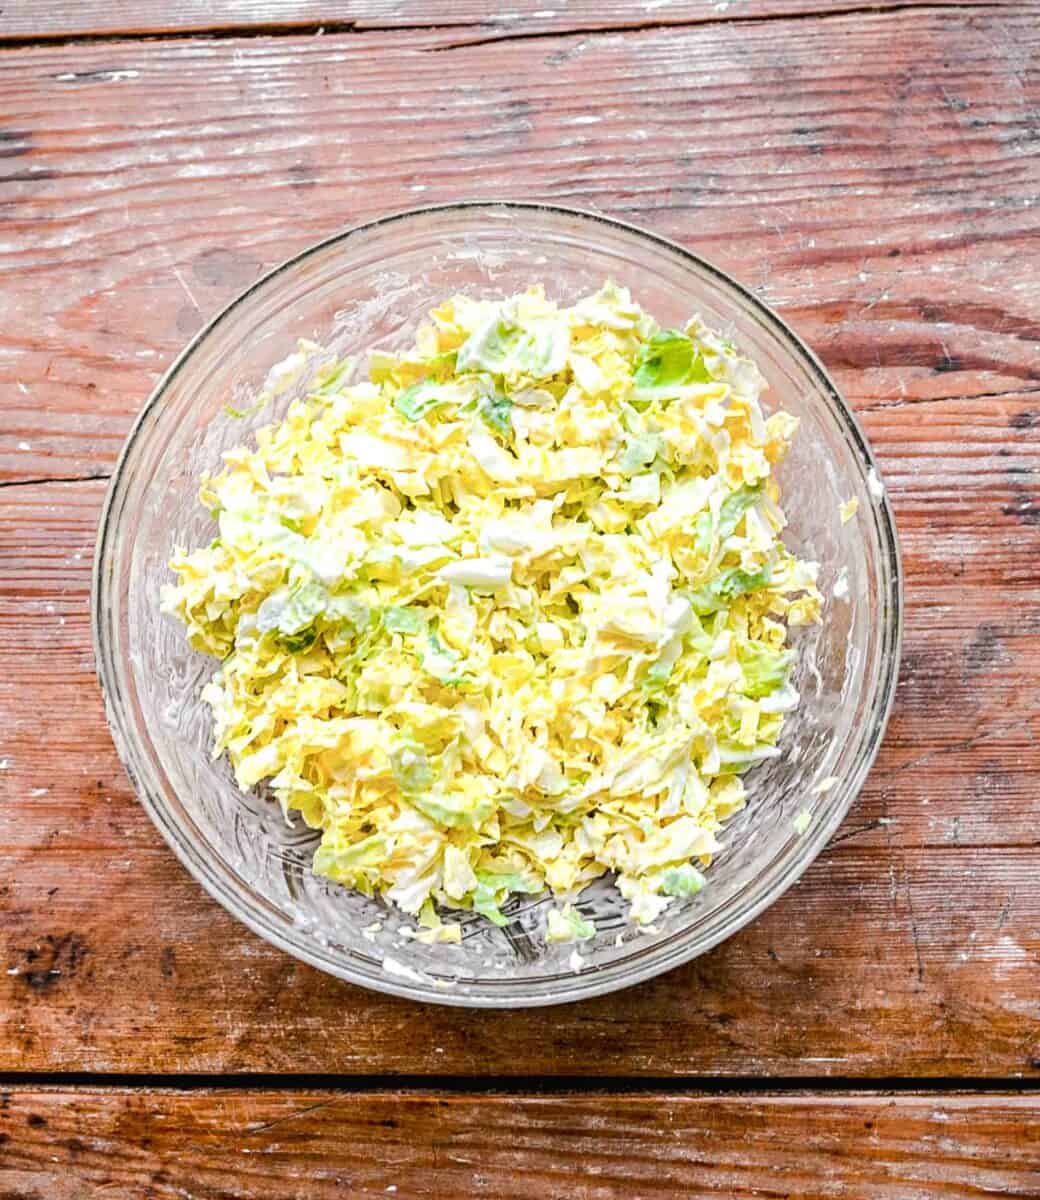 Cabbage slaw in a bowl.